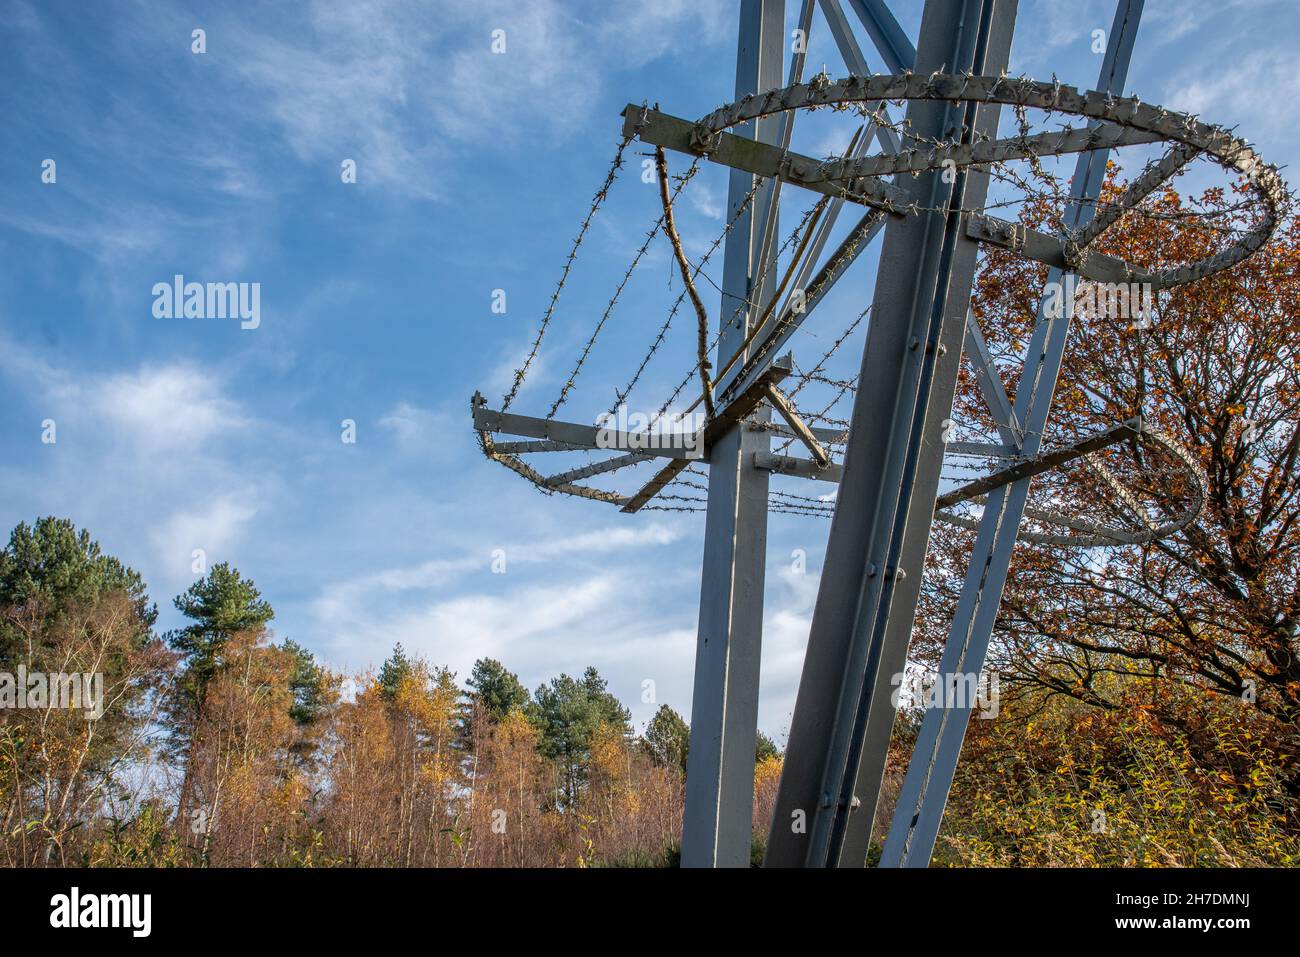 Anti climbing guard on electricity pylon with barbed wire on clear day with blue sky and trees. Stock Photo